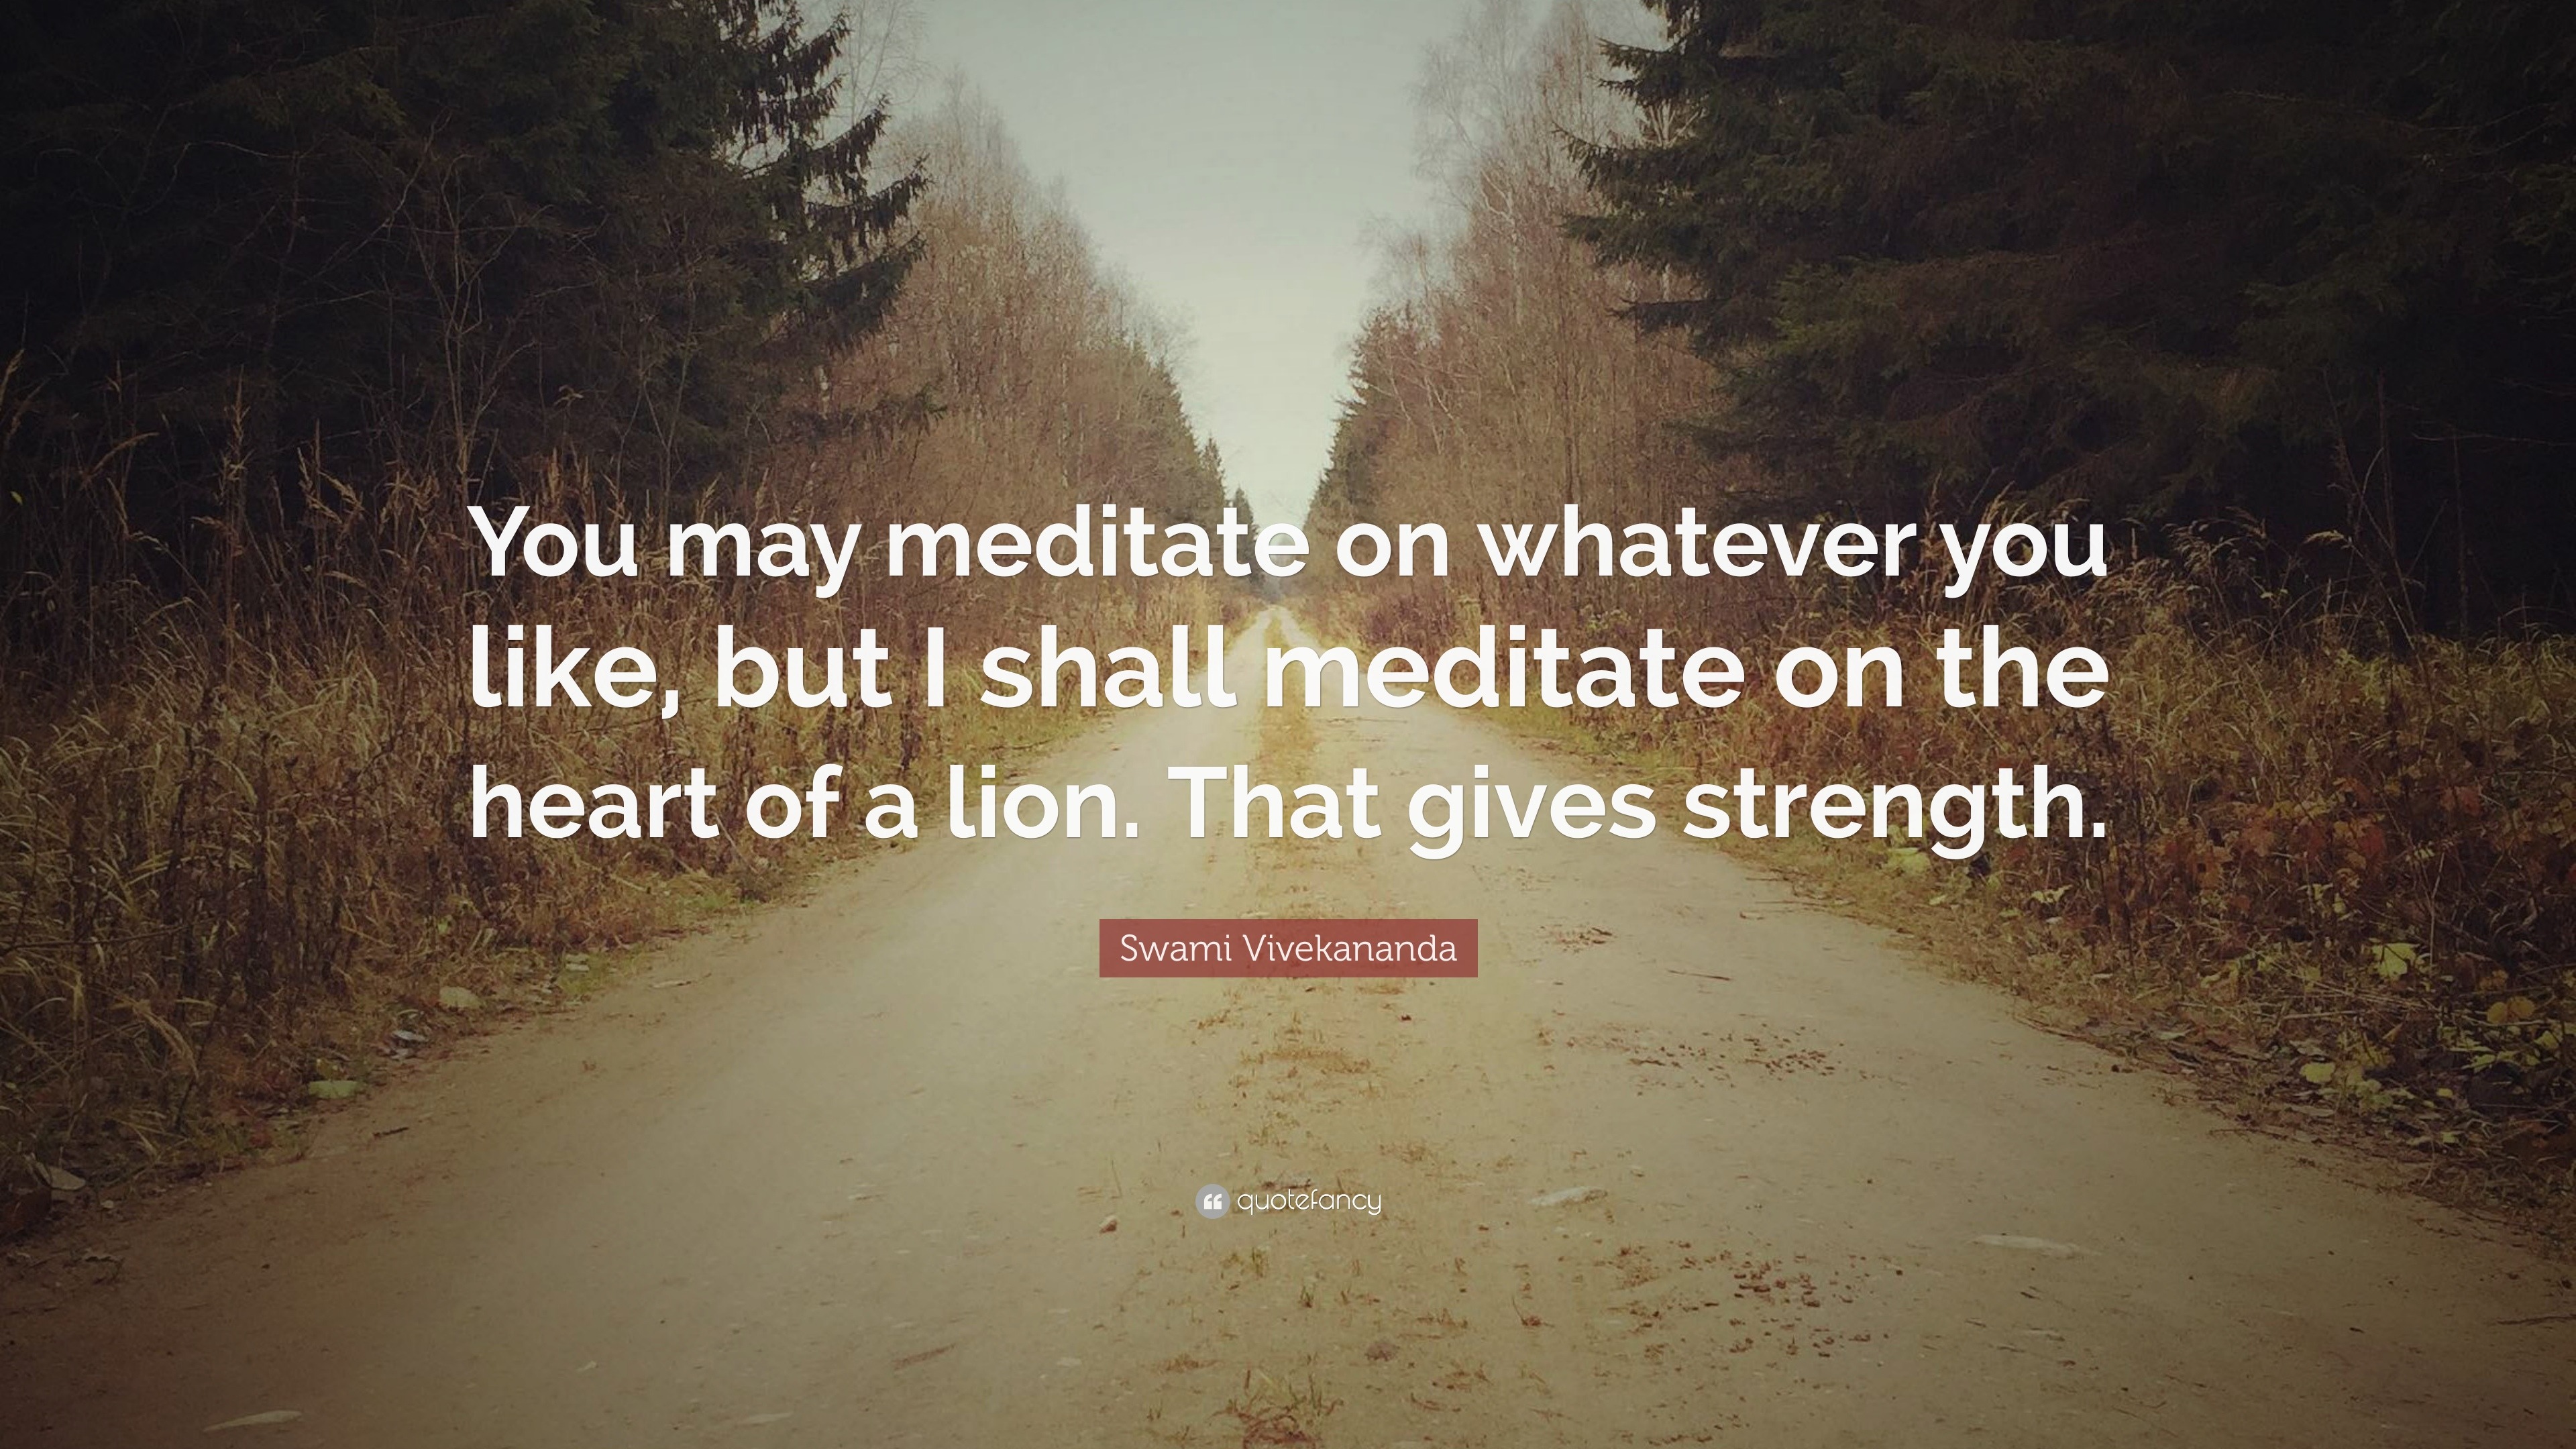 Swami Vivekananda Quote You May Meditate On Whatever You Like But I Shall Meditate On The